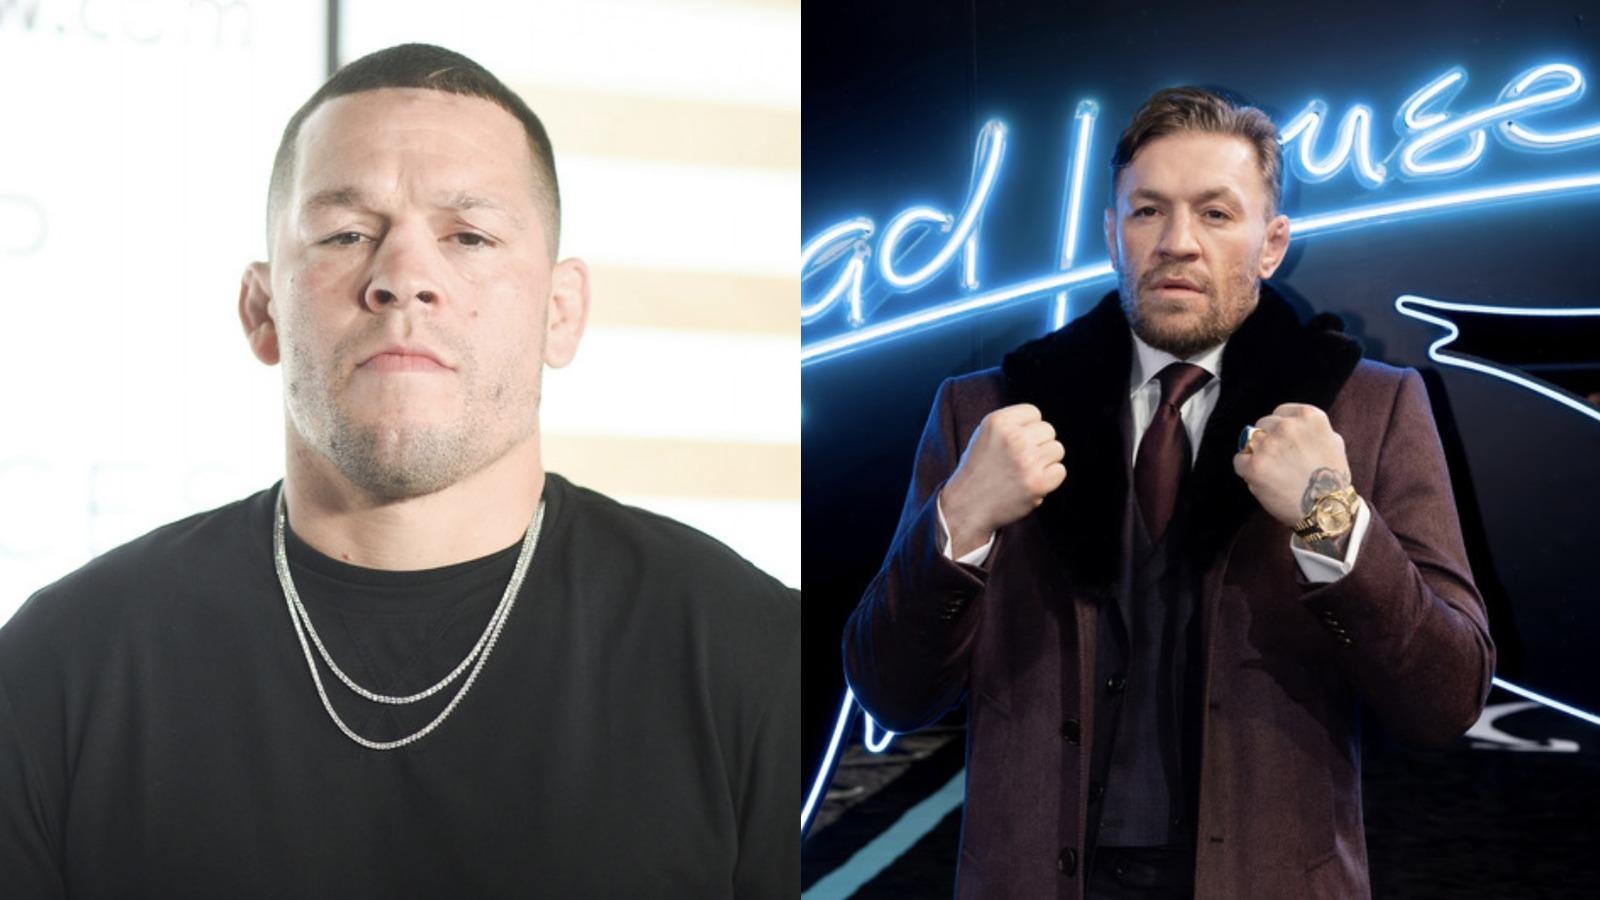 Nate Diaz comes to the defense of Conor McGregor as the UFC contract dispute continues